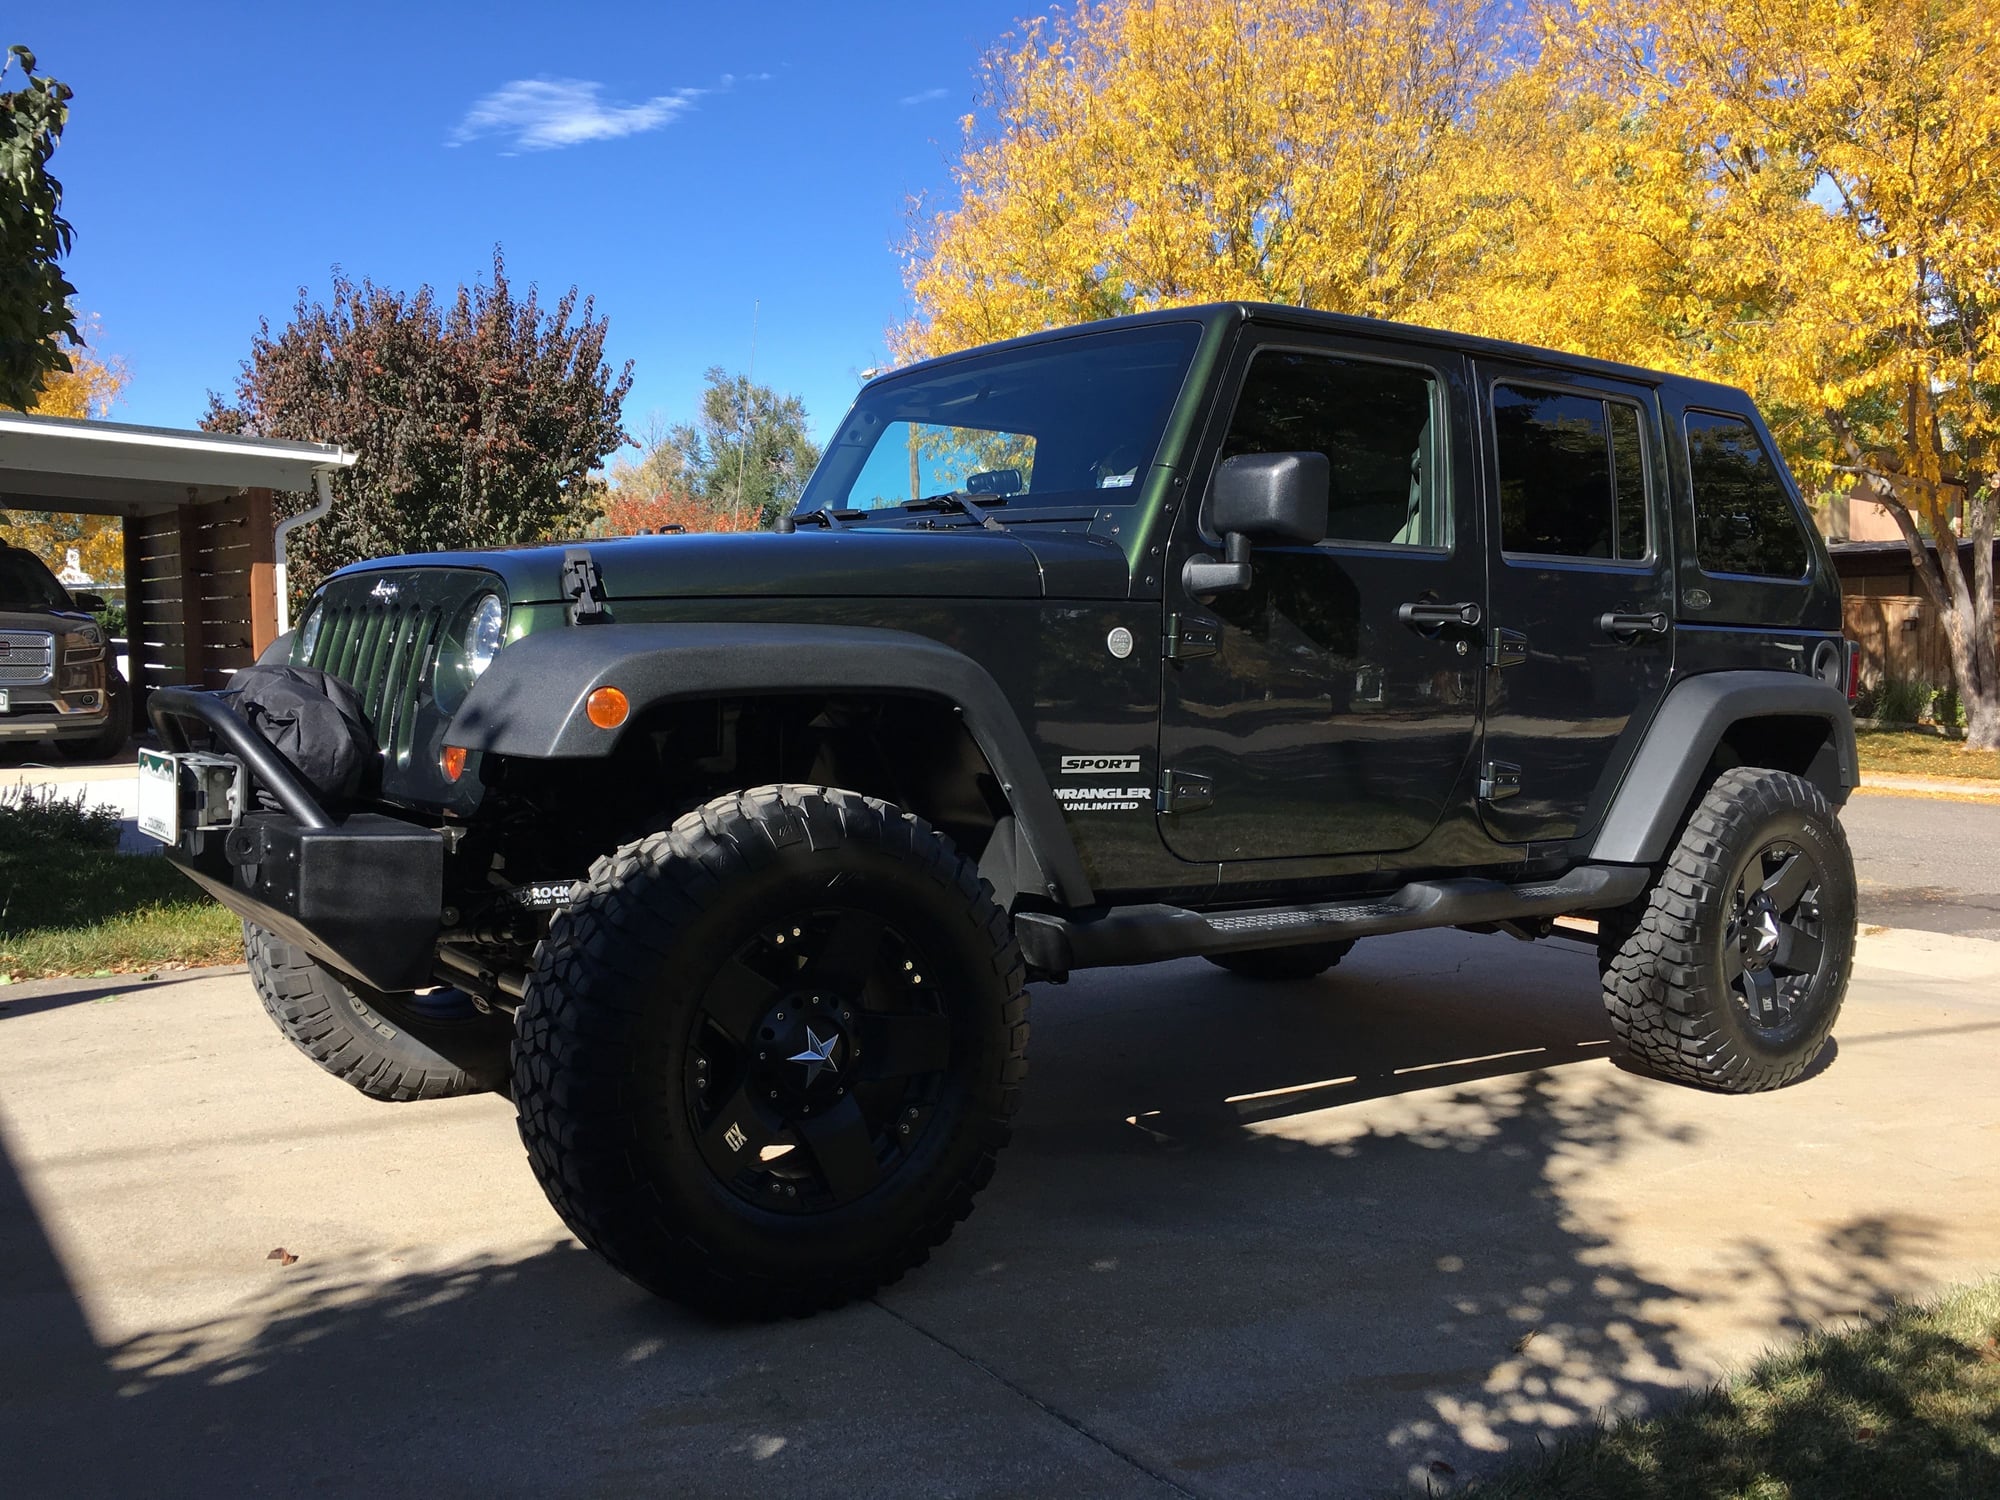 2010 Jeep Wrangler - Supercharged, Clean, Built JKU! - Used - VIN 1J4BA3H18AL216127 - 69,000 Miles - 6 cyl - 4WD - Automatic - SUV - Other - Denver, CO 80222, United States